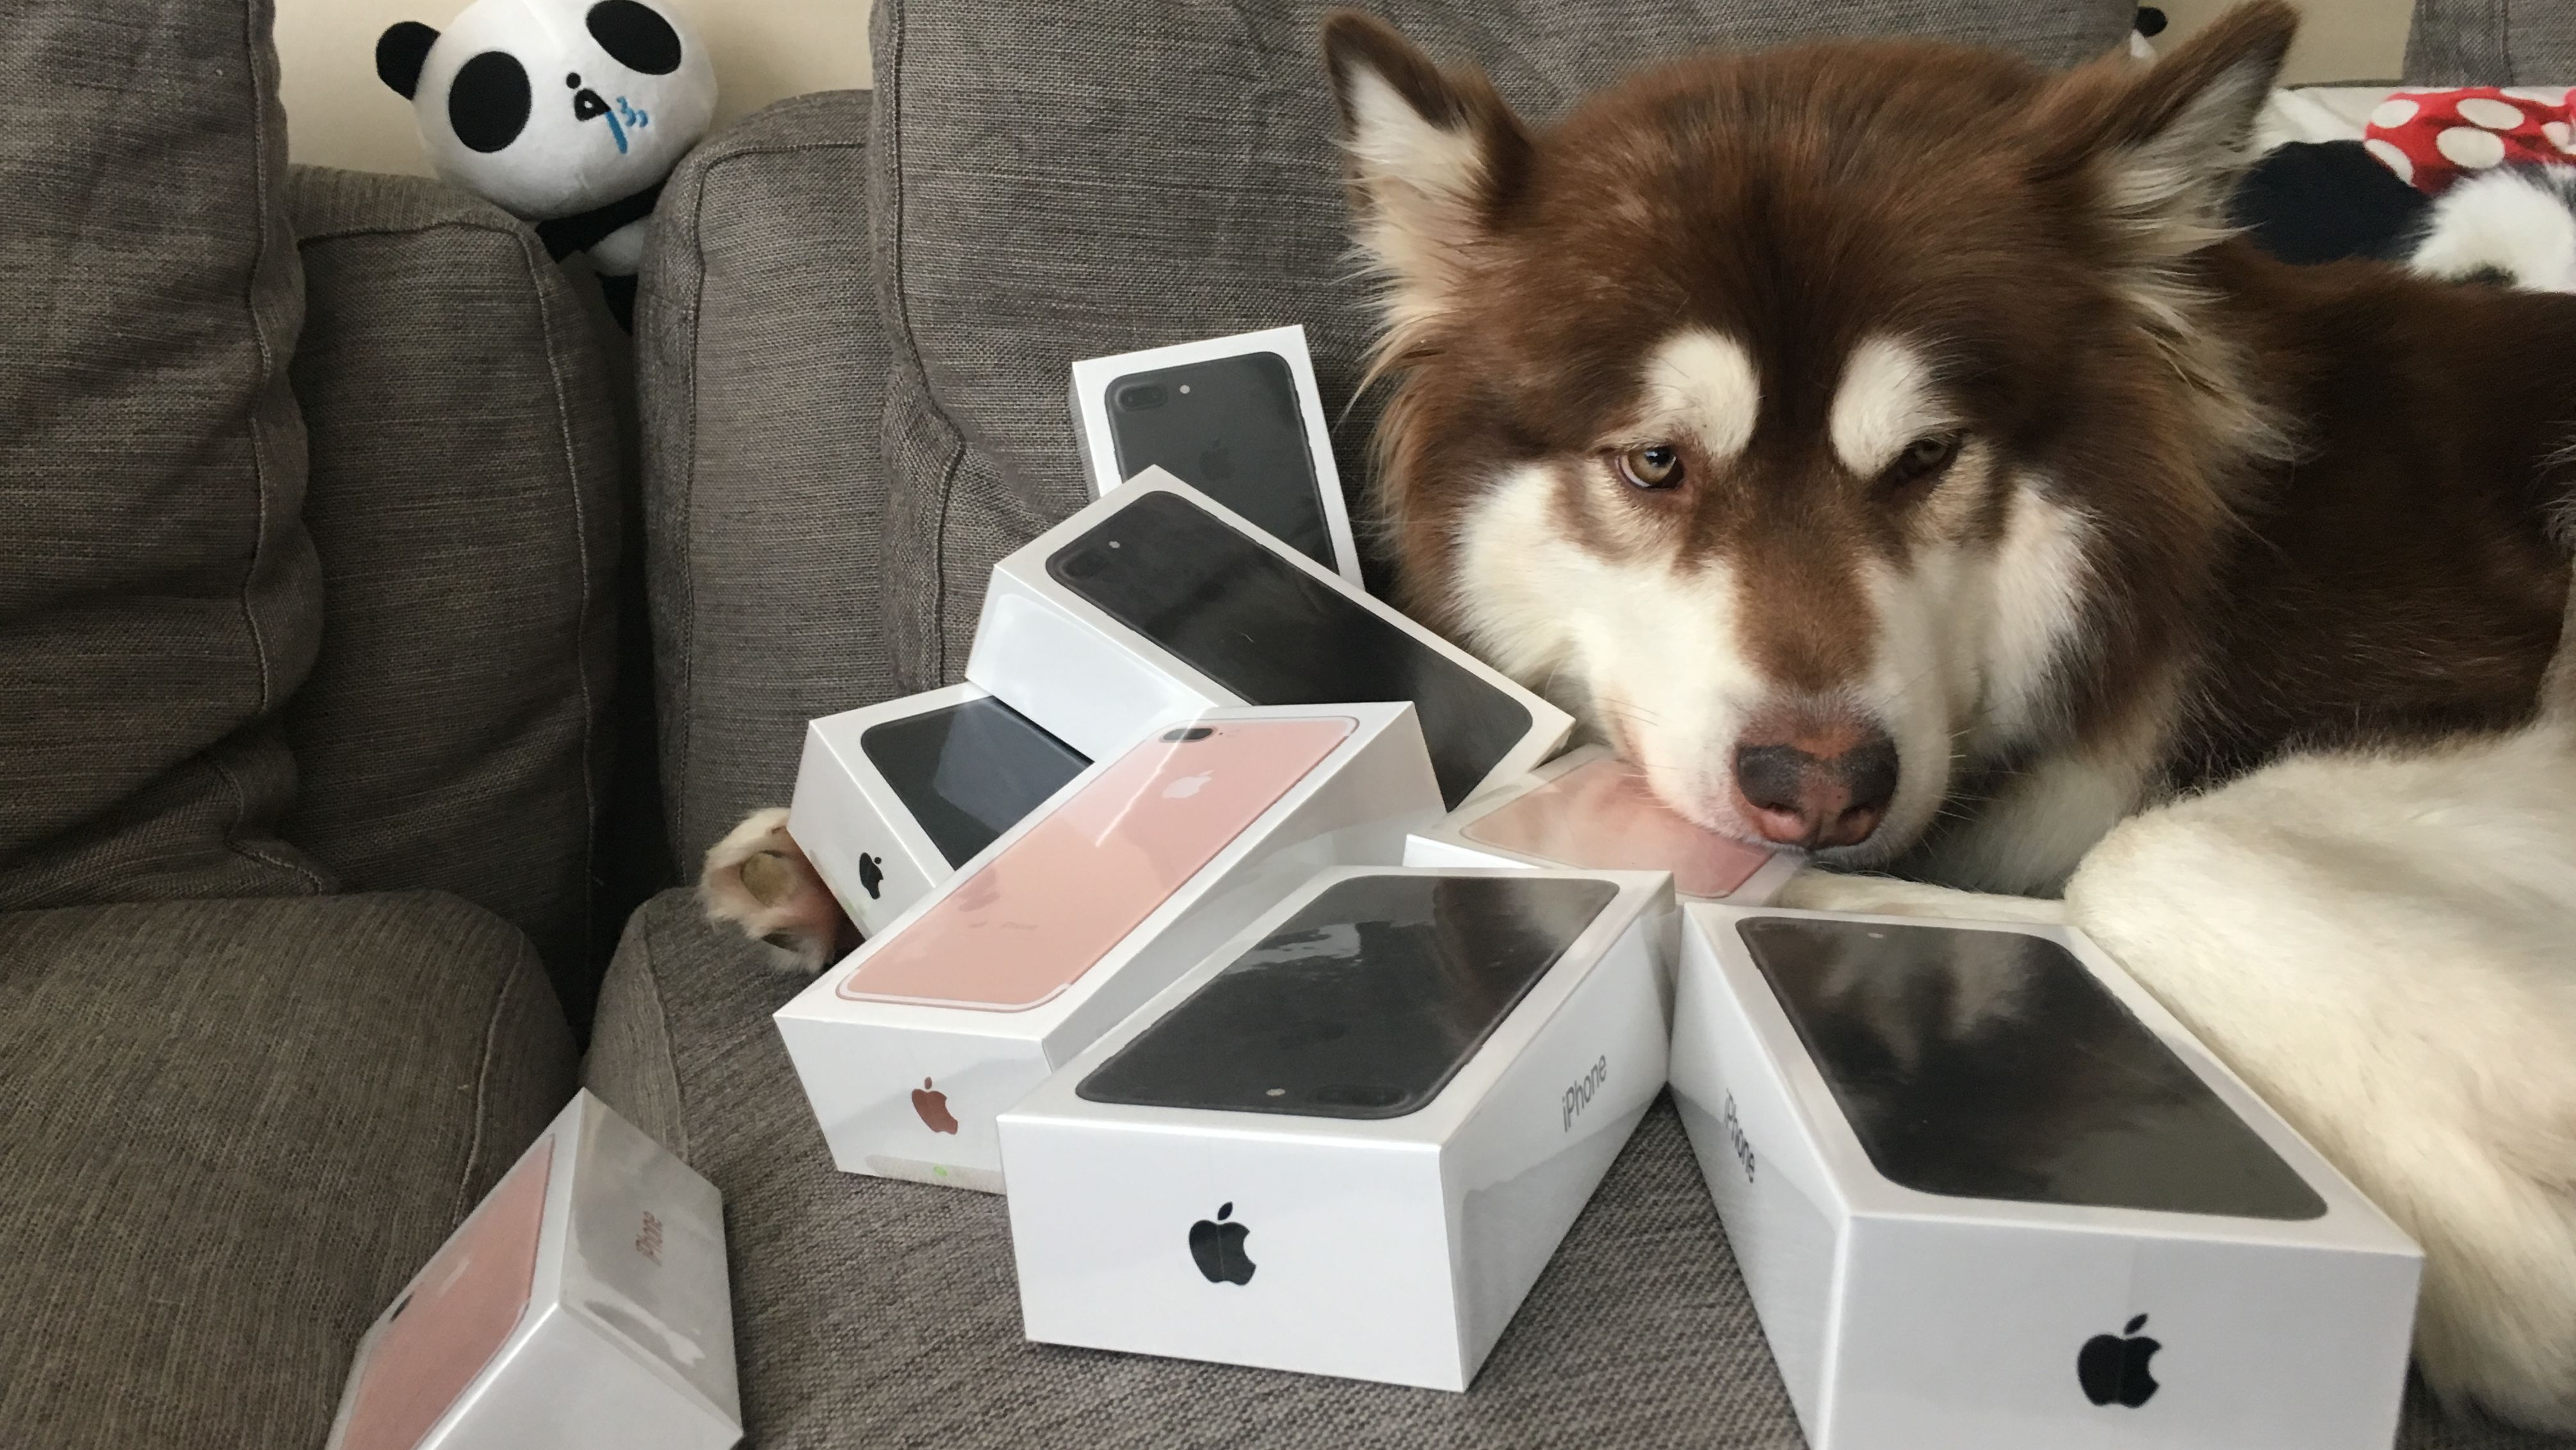 Coco poses with her black and rose gold iPhone 7 handsets.